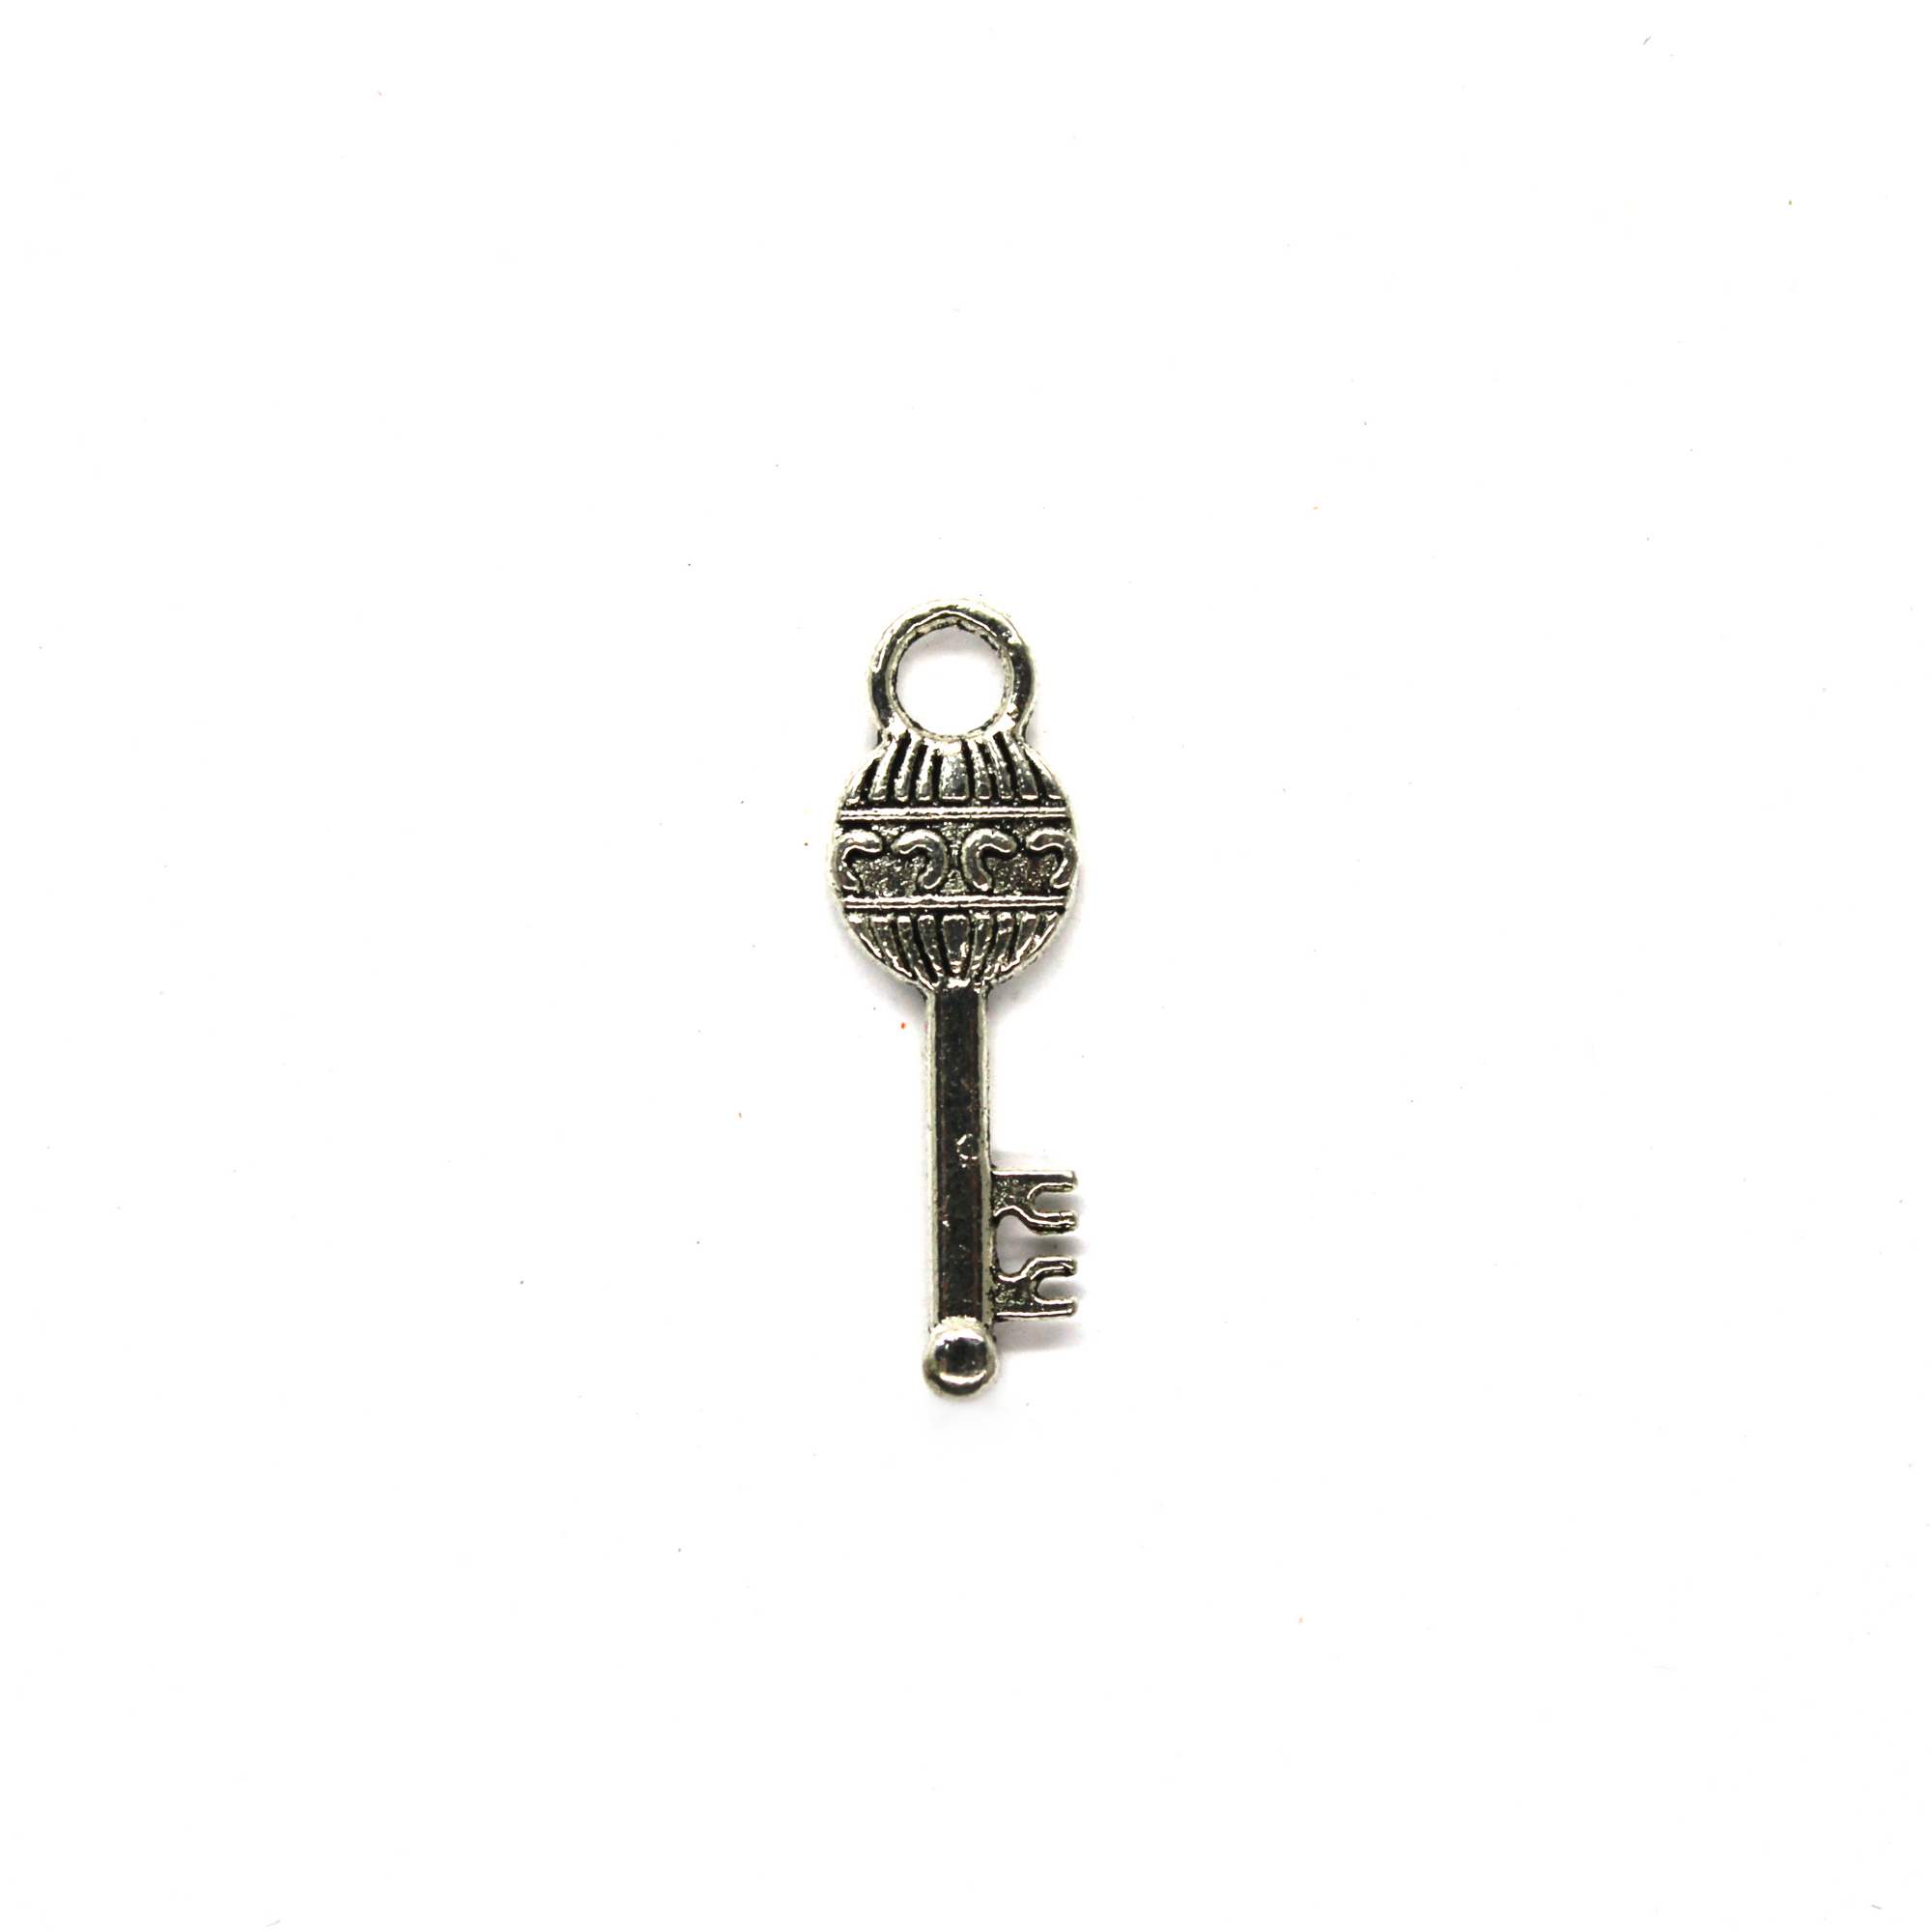 Charms, Balloon Key, Silver, Alloy, 26mm X 8mm X 2mm, Sold Per pkg of 6